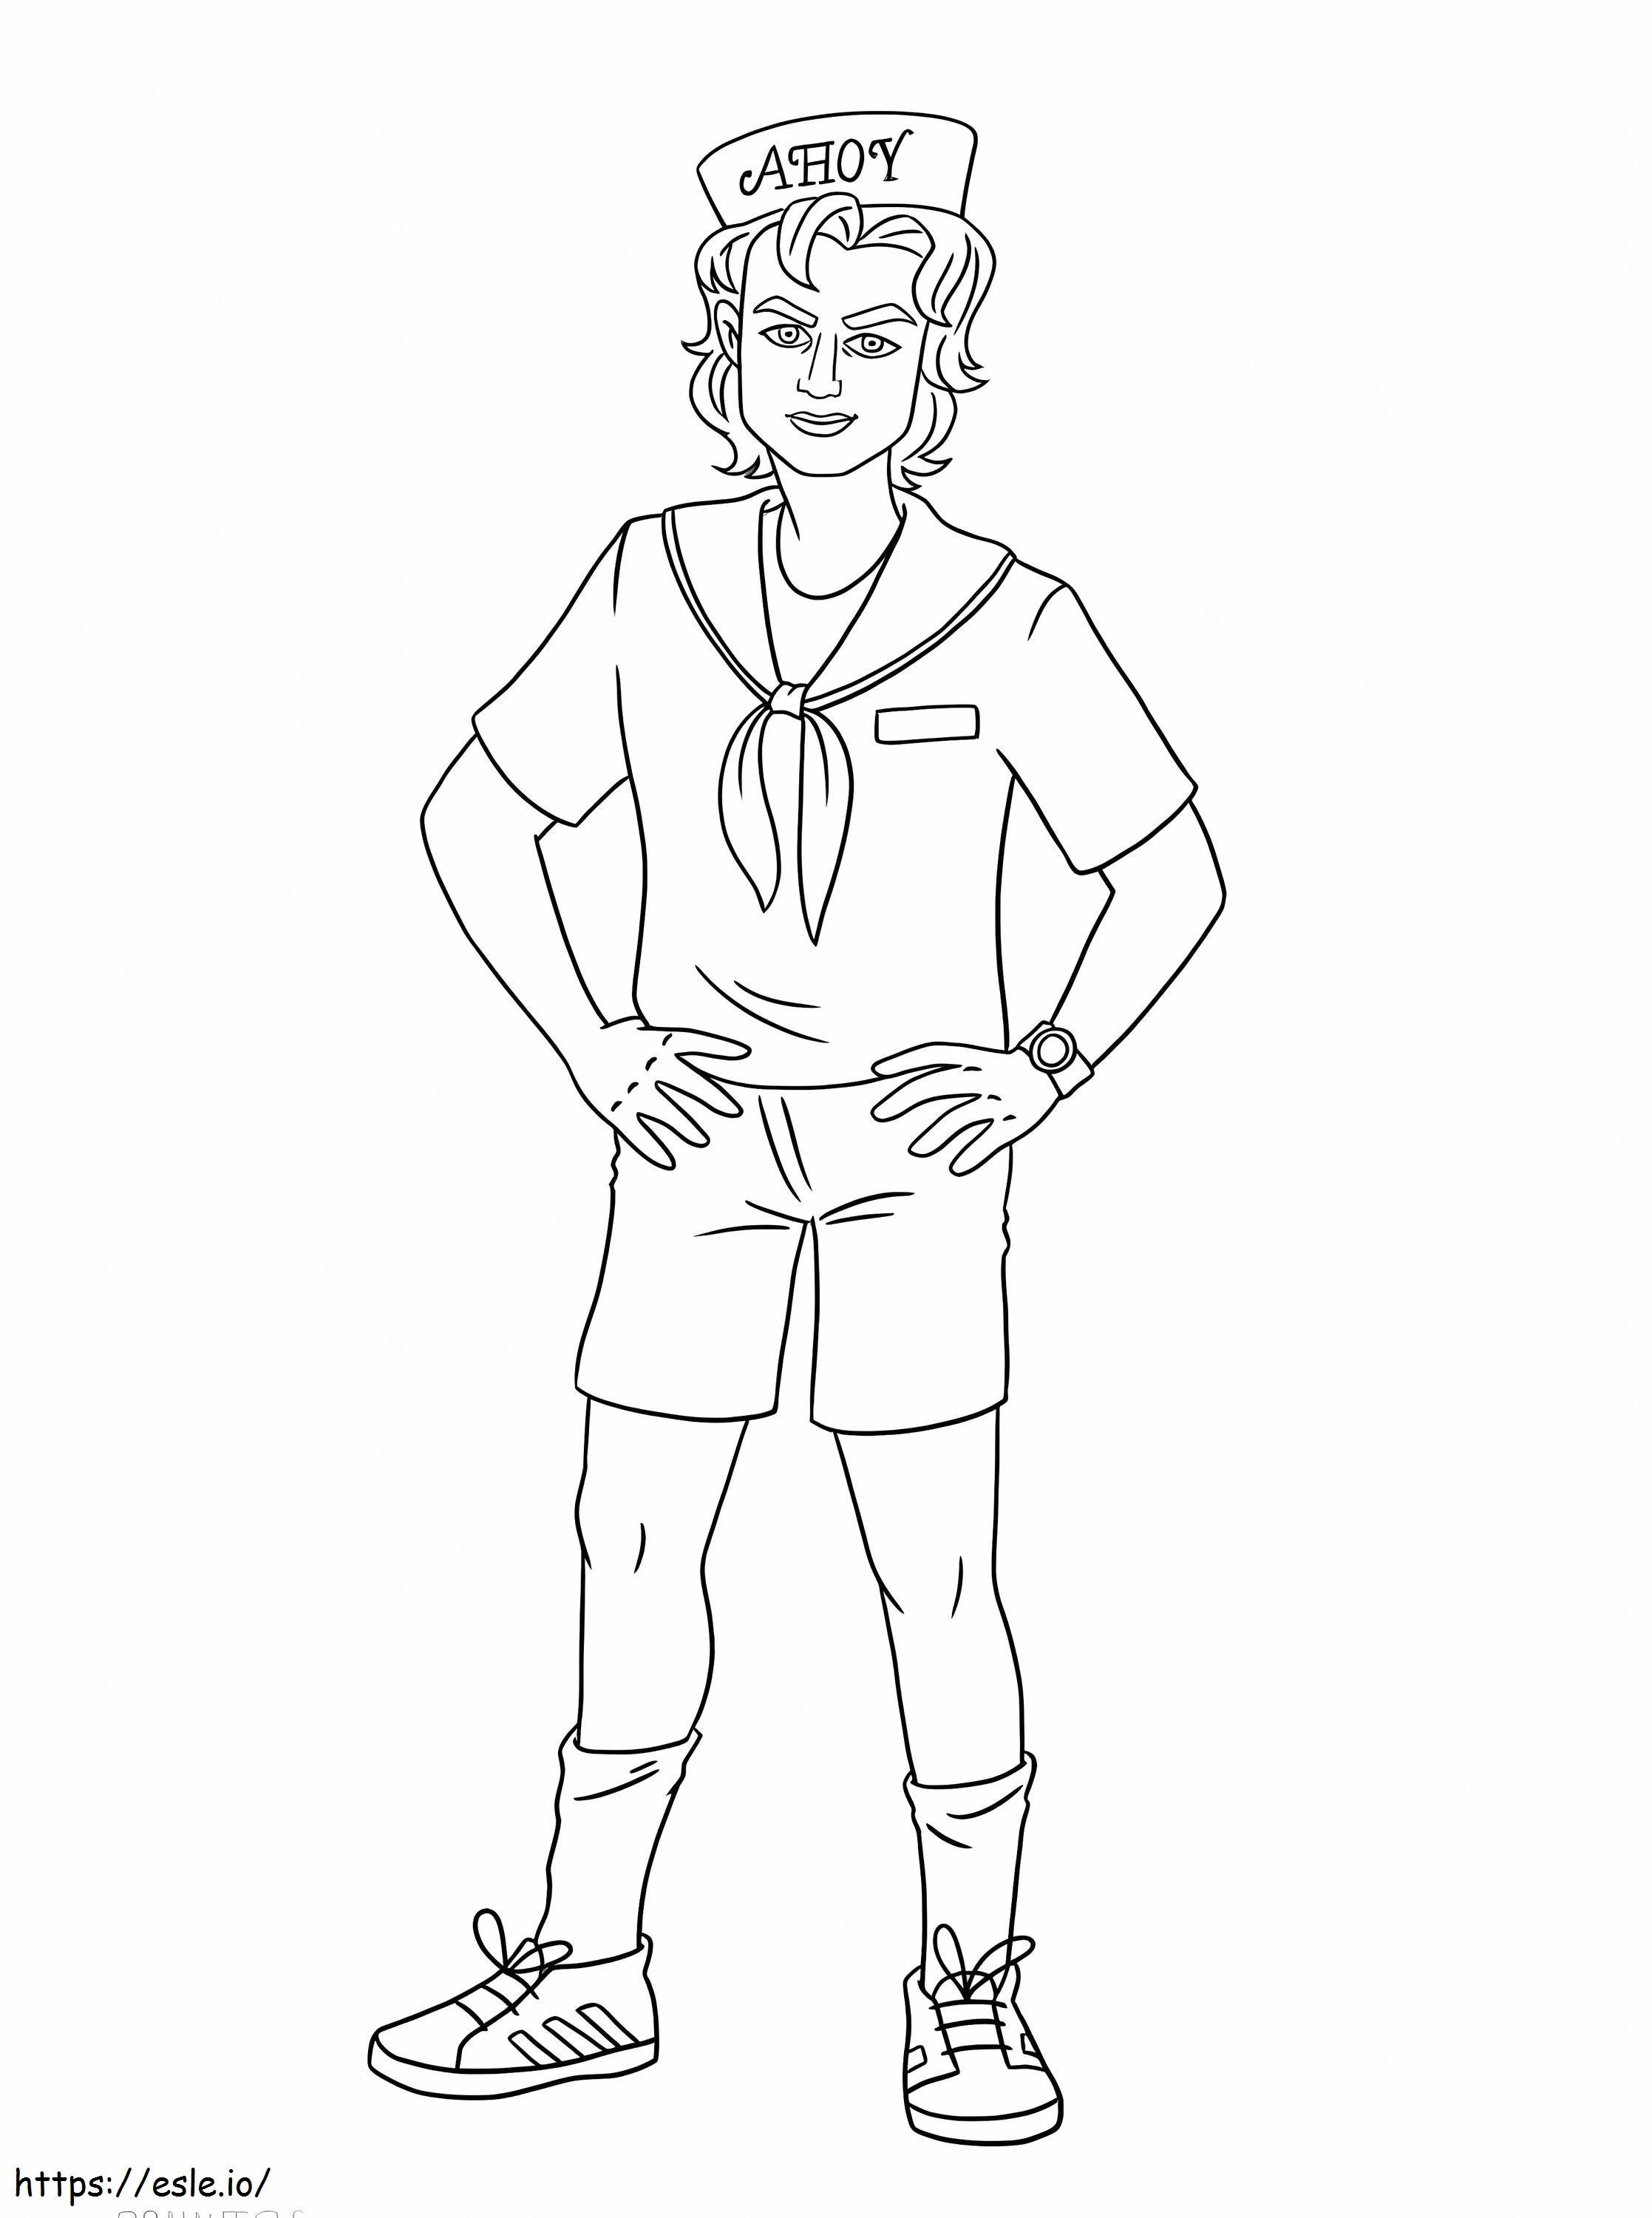 Steve Stranger Things coloring page